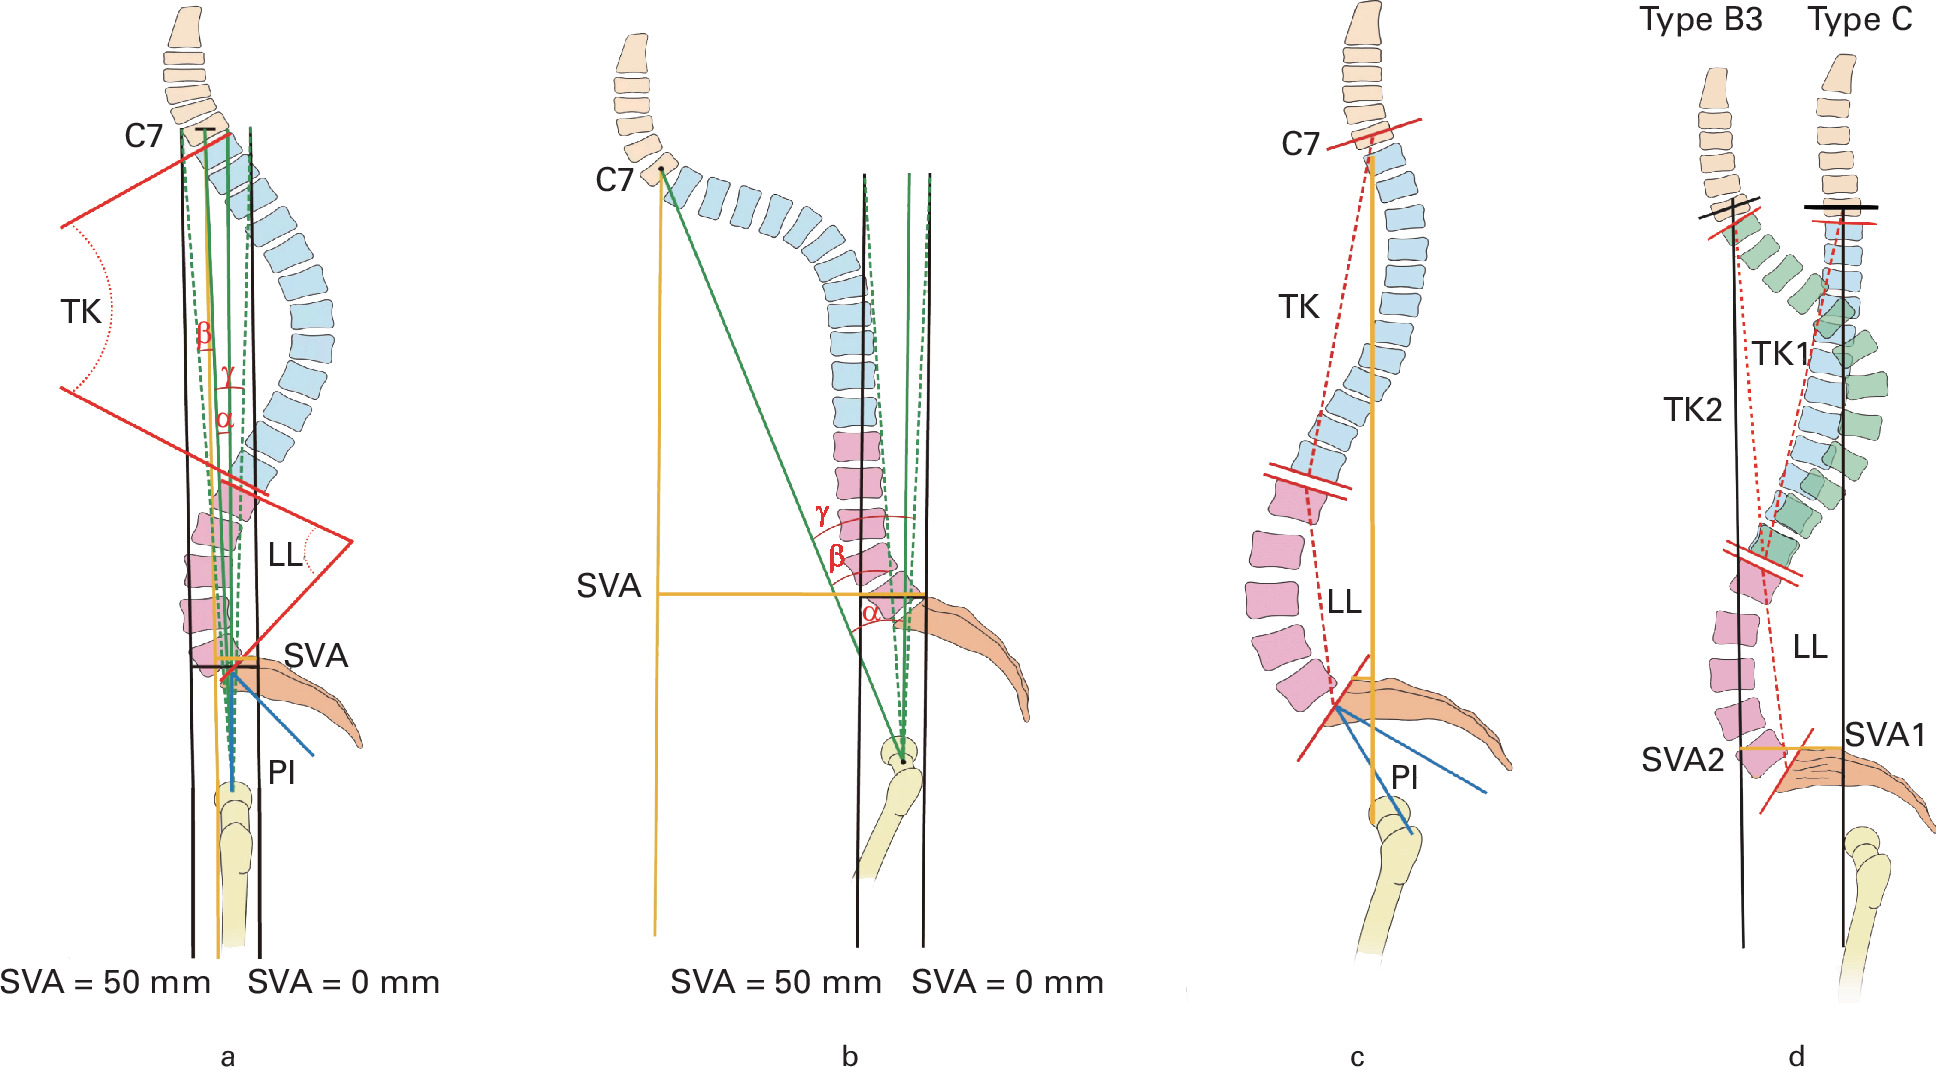 Fig. 2 
          Schematic drawing of definitions for the classification of the patients and for the parameters of the prediction of the standing pelvic tilt (PT). a) Definitions of the key parameters for the parameters of the classification on the lateral view. The sagittal vertical axis (SVA) was defined as the distance from the upper corner of the S1 endplate to a vertical line from the centre of the body of C7 as the indicator of sagittal balance with a normal range of 0 mm to 50 mm. Pelvic tilt was defined as the angle subtended by a vertical line and the line connecting the centres of both hips and the midpoint of the superior endplate of S1, and PI was defined as the angle subtended by this line and the line perpendicular to the S1 endplate. Lumbar lordosis (LL) was defined as the Cobb angle between the upper endplate of L1 and the upper endplate of S1. Thoracic kyphosis (TK) was defined as the Cobb angle between the upper endplate of T1 and the lower endplate of T12. b) SVA-driven method predicts the change of pelvic tilt by assuming the spine to be a solid body for type A, B1, B2, and B3 patients. This change was predicted as the angle of the centre of C7 shifting from the preoperative C7 plumb line to the vertical line (α angle) over the predicted centre of the hip with SVA = 50 mm and 0 mm vertical lines as the lower (β angle) and upper (γ angle) limits of prediction, respectively. c) LL-driven method for predicting the change for type C patients. d) Effect of the LL-TK mismatch on the sagittal balance, leading to hyperextension of the spine (blue contour) and a negative SVA in type C patients and a balanced spinal curvature (green contour) in type B3 patients.
        